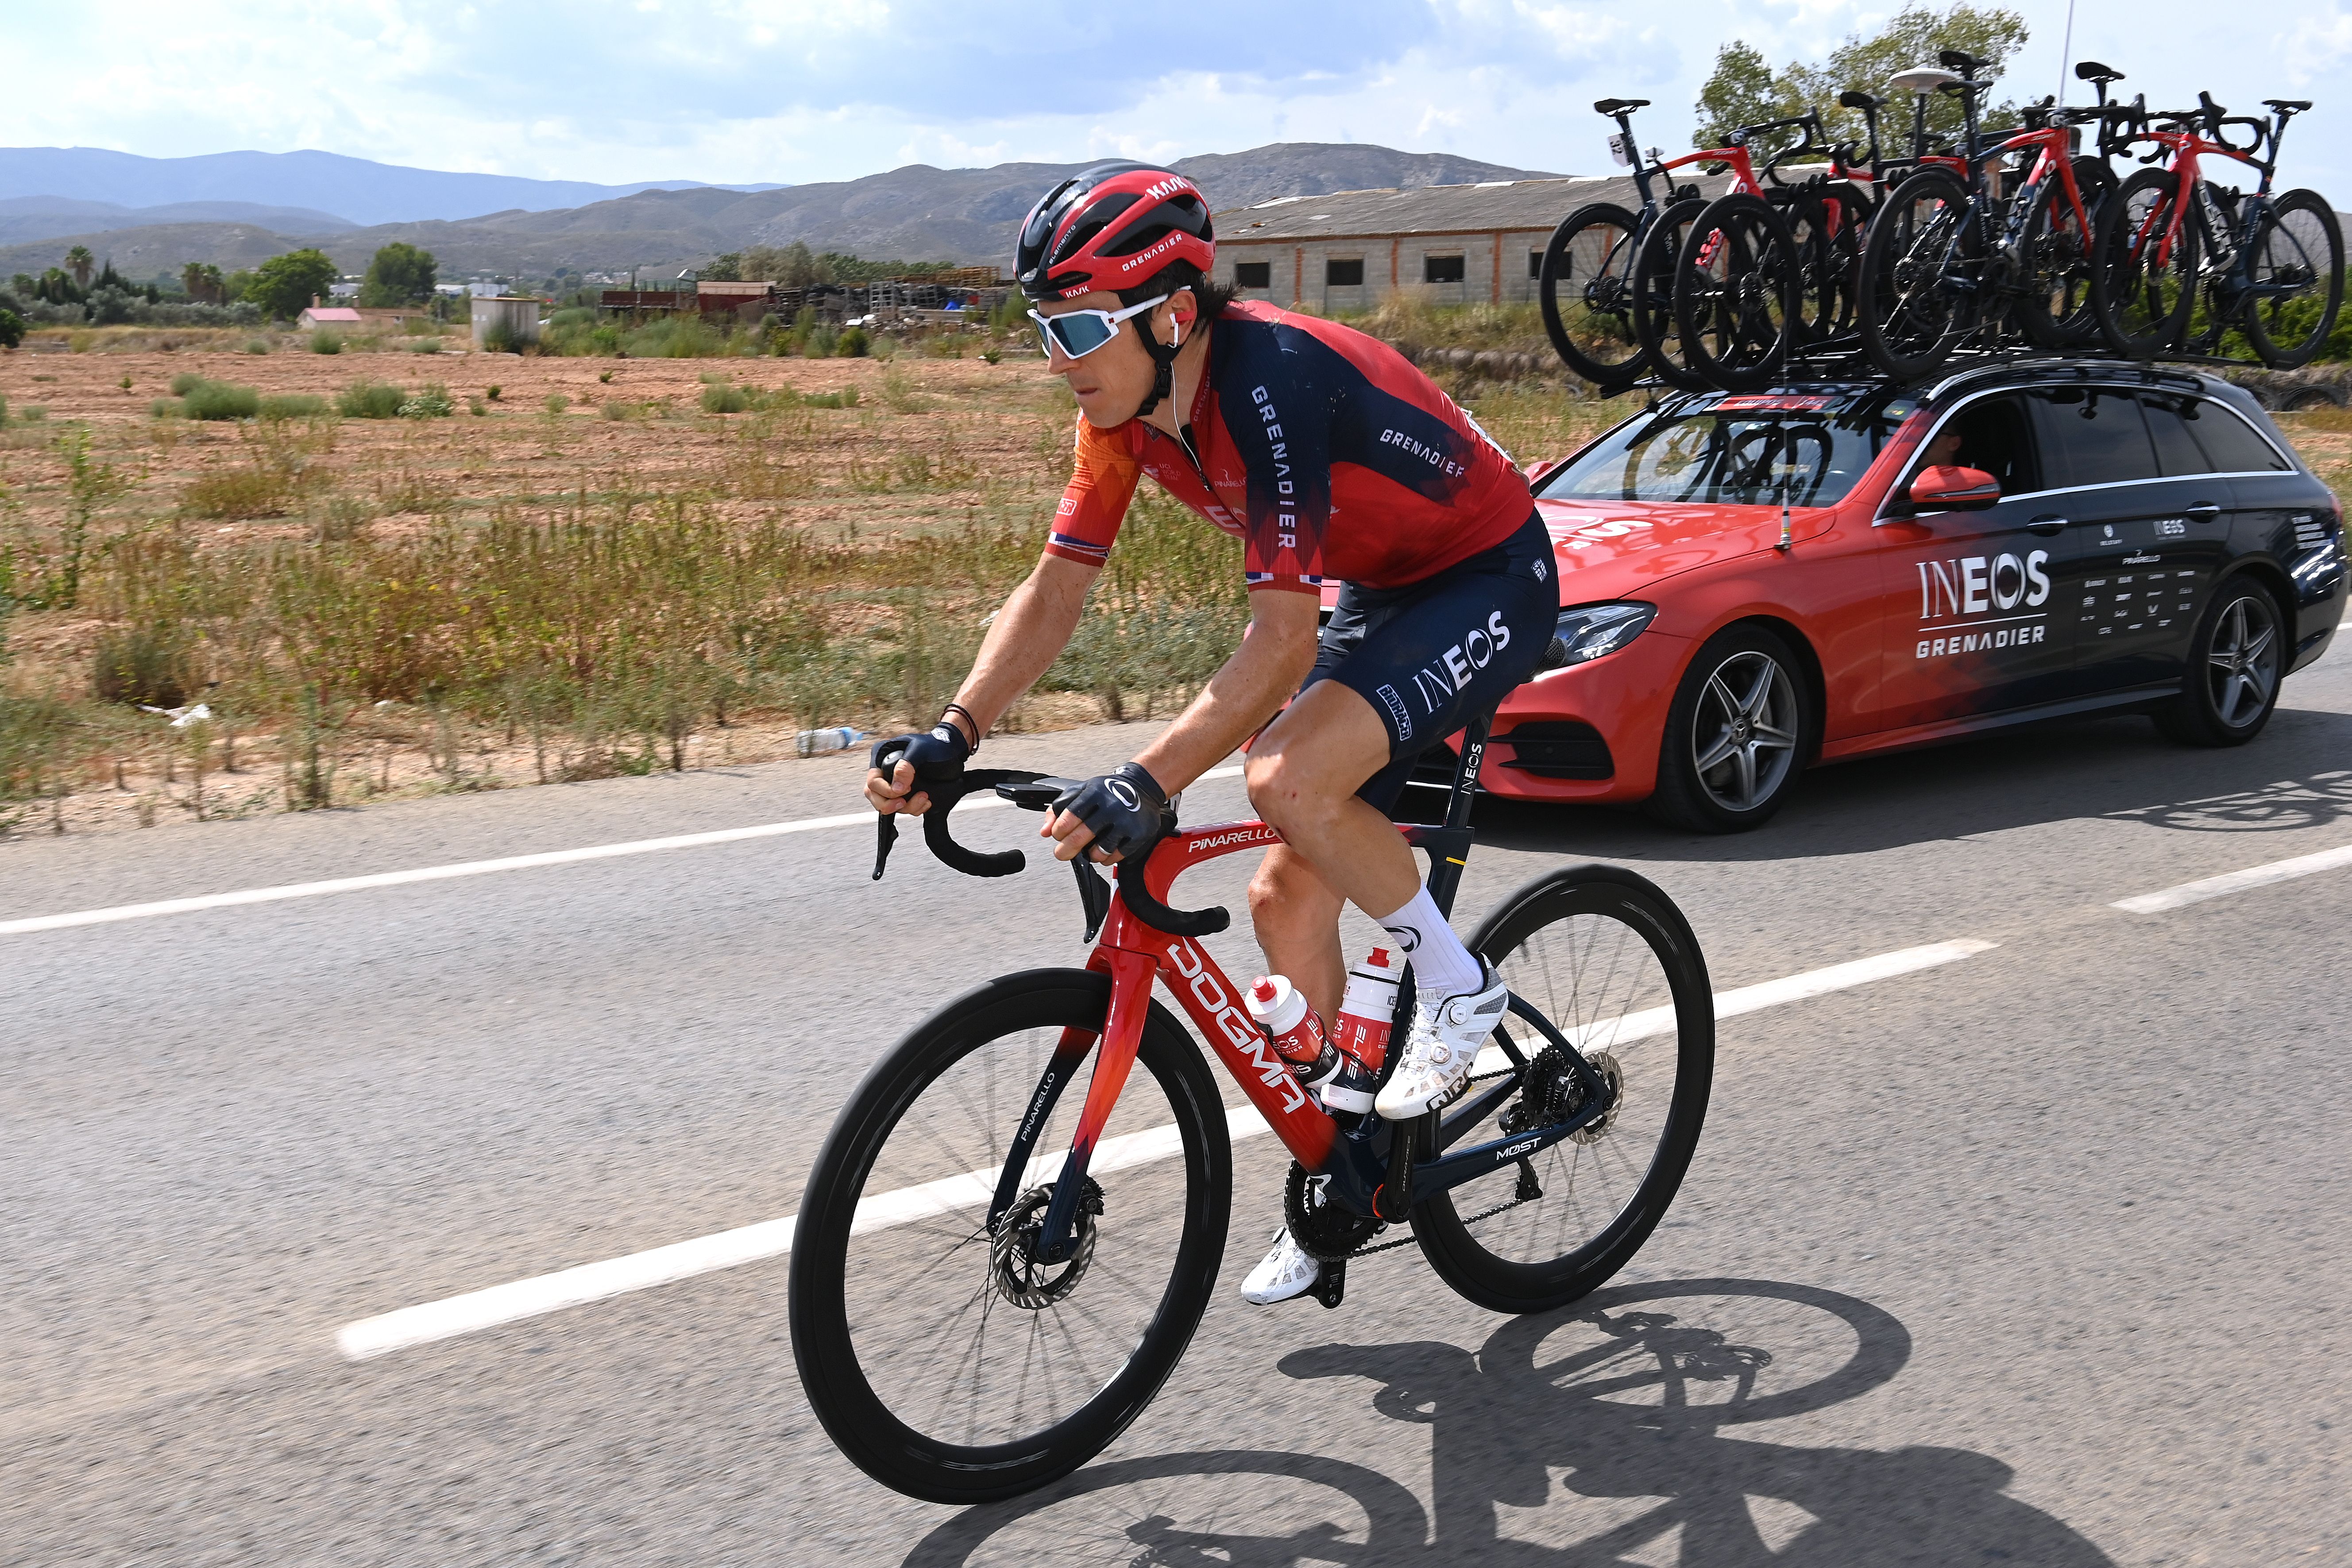 Vuelta a España Geraint Thomas loses time after crash on stage 7 GCN